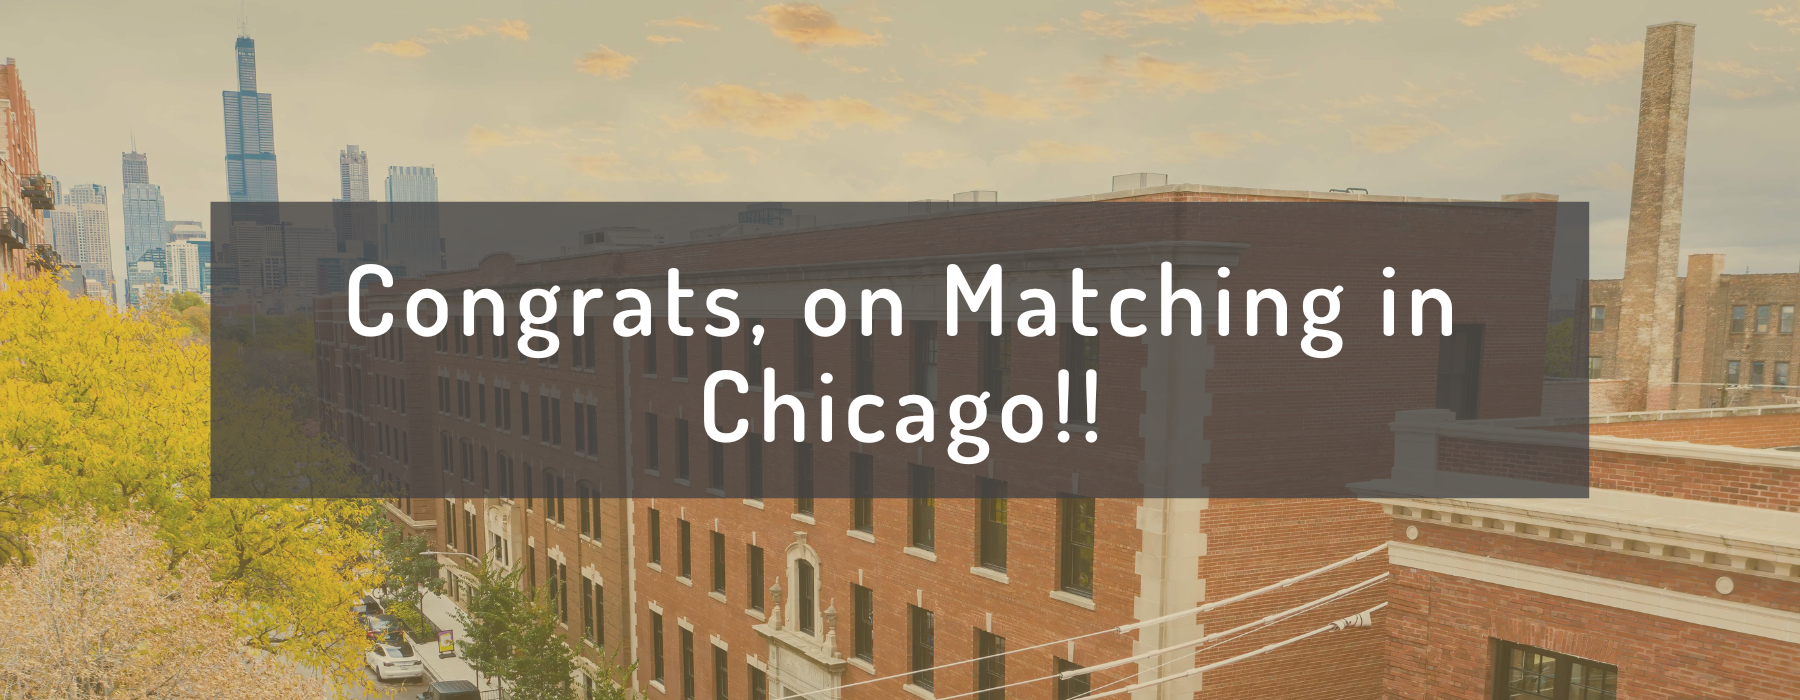 chicago match day apartments in West Loop at The Duncan